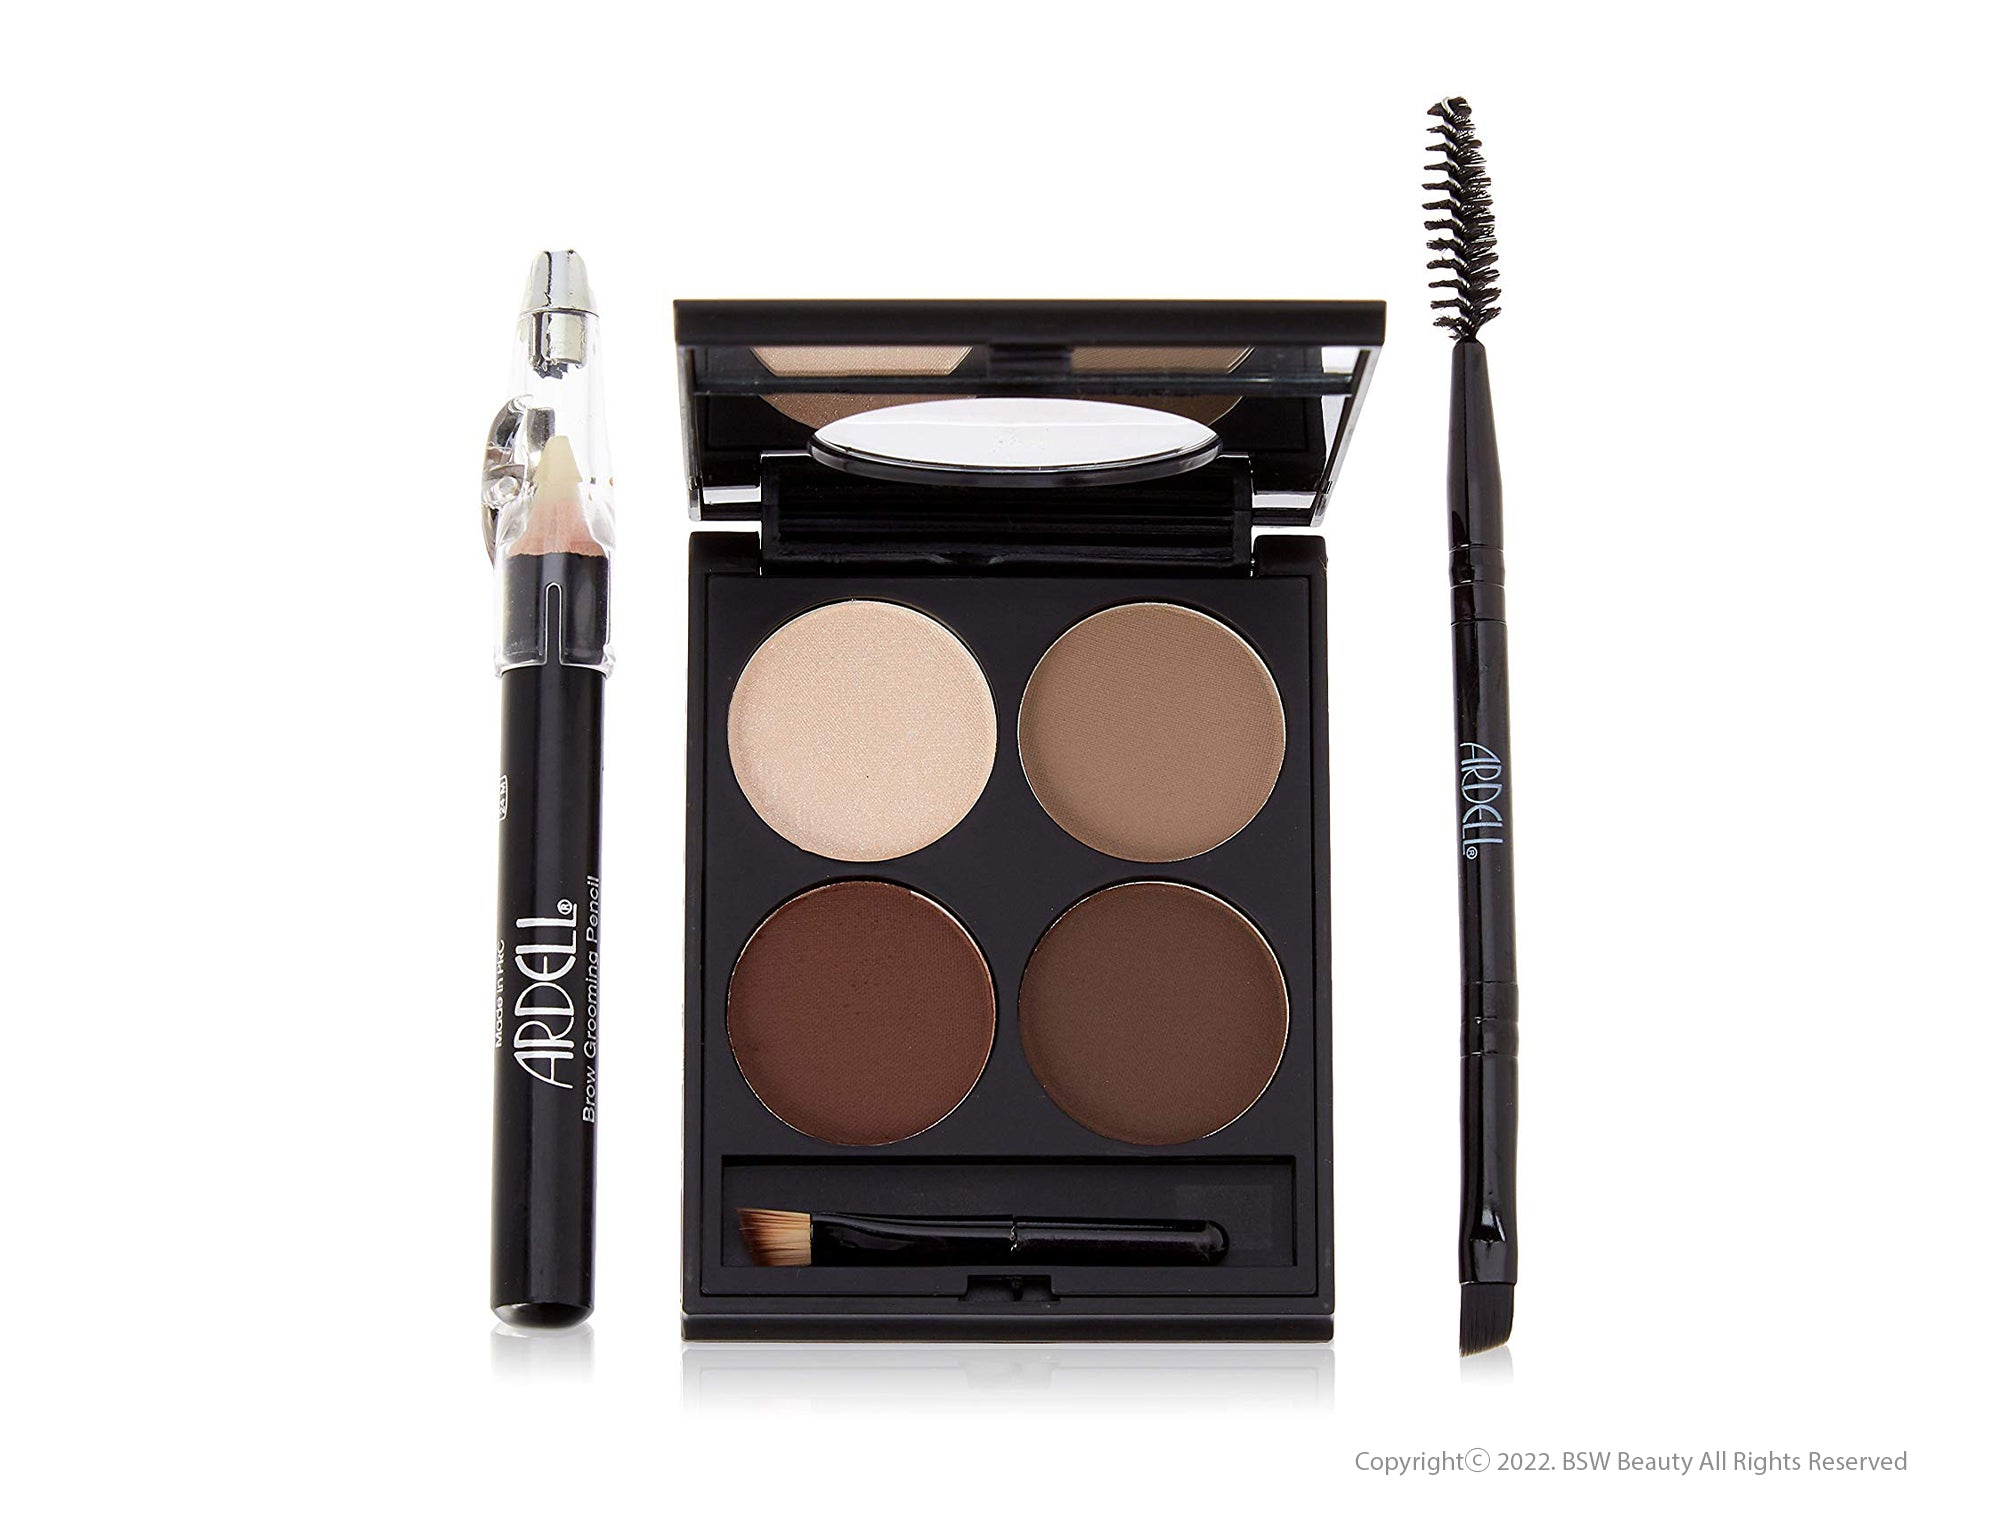 ARDELL PROFESSIONAL BROW DEFINING KIT